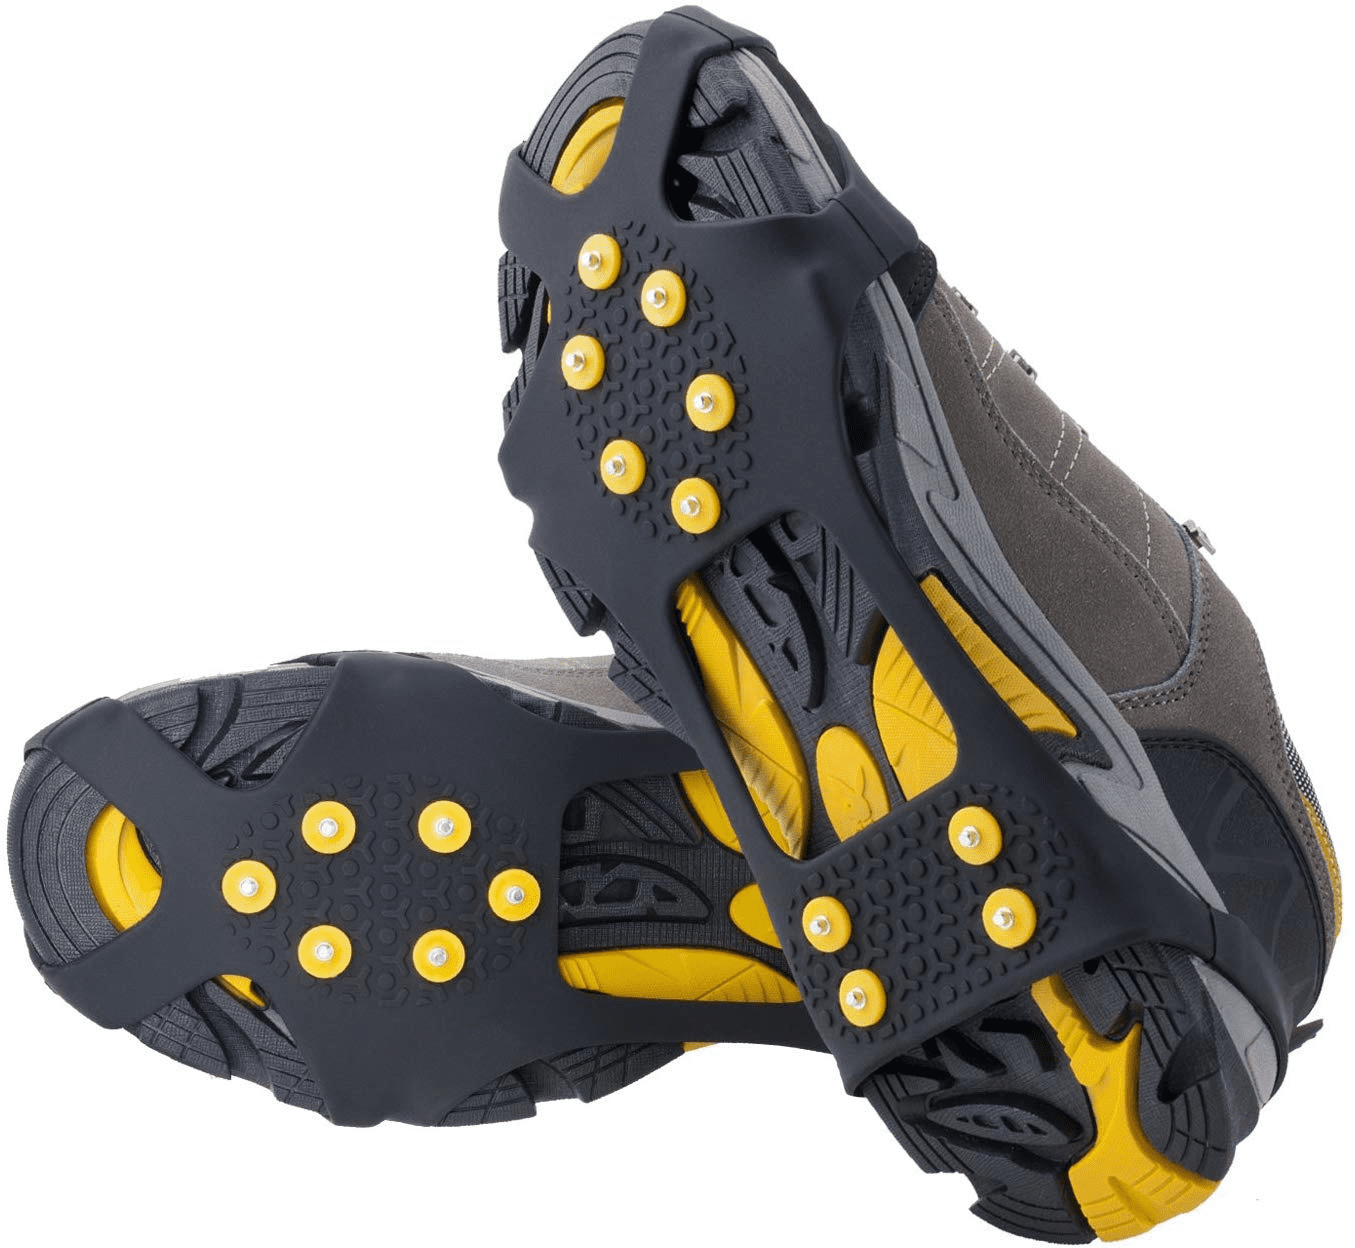 YYOJ Ice Grippers ice grips for shoes ice & snow grips,Anti Slip 10-Studs TPE Rubber Crampons 